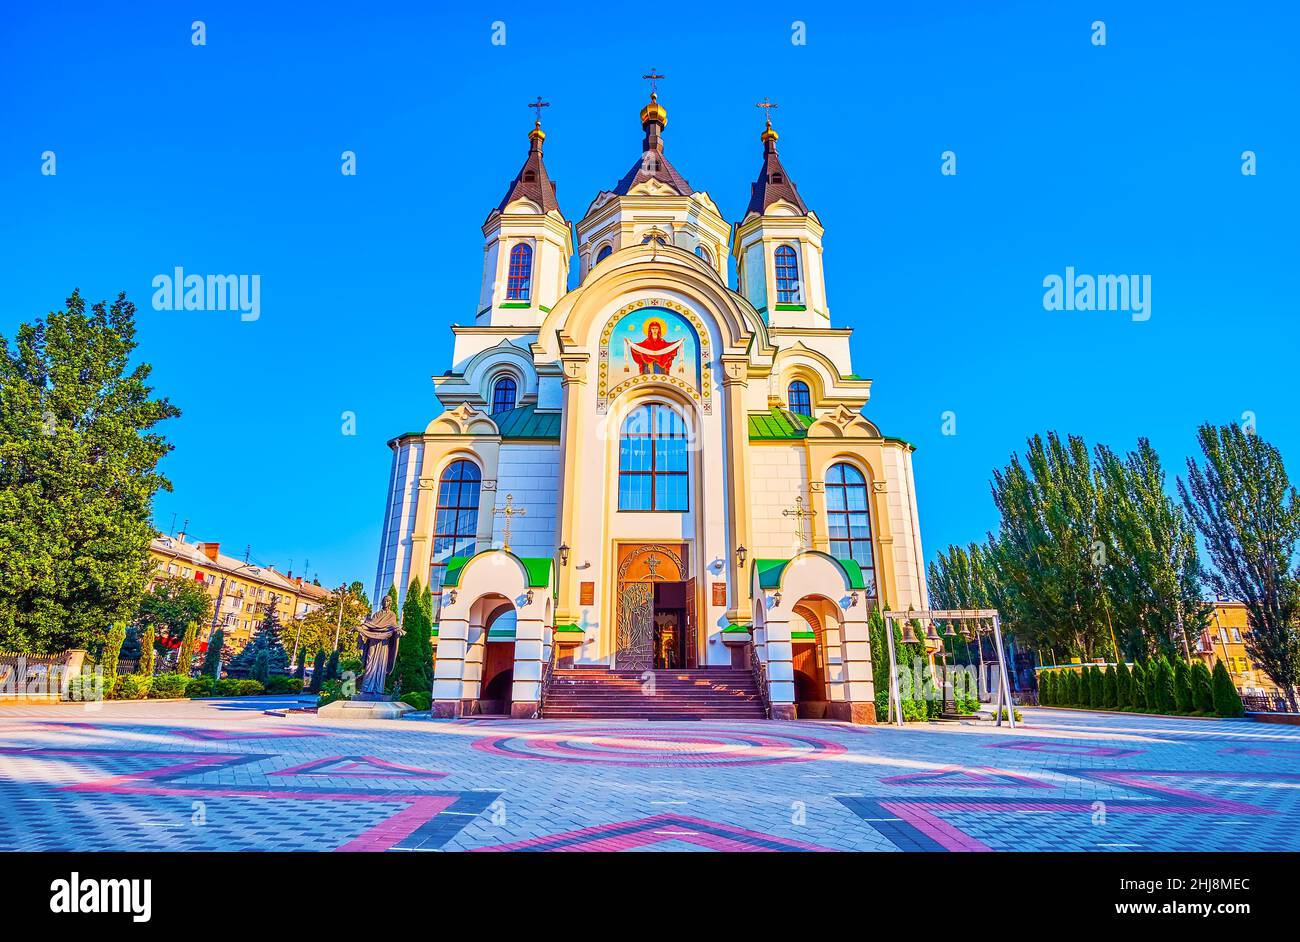 Facade of the Holy Pokrovsky Bishop's Cathedral with scenic pavement of the courtyard,  Zaporizhzhia, Ukraine Stock Photo